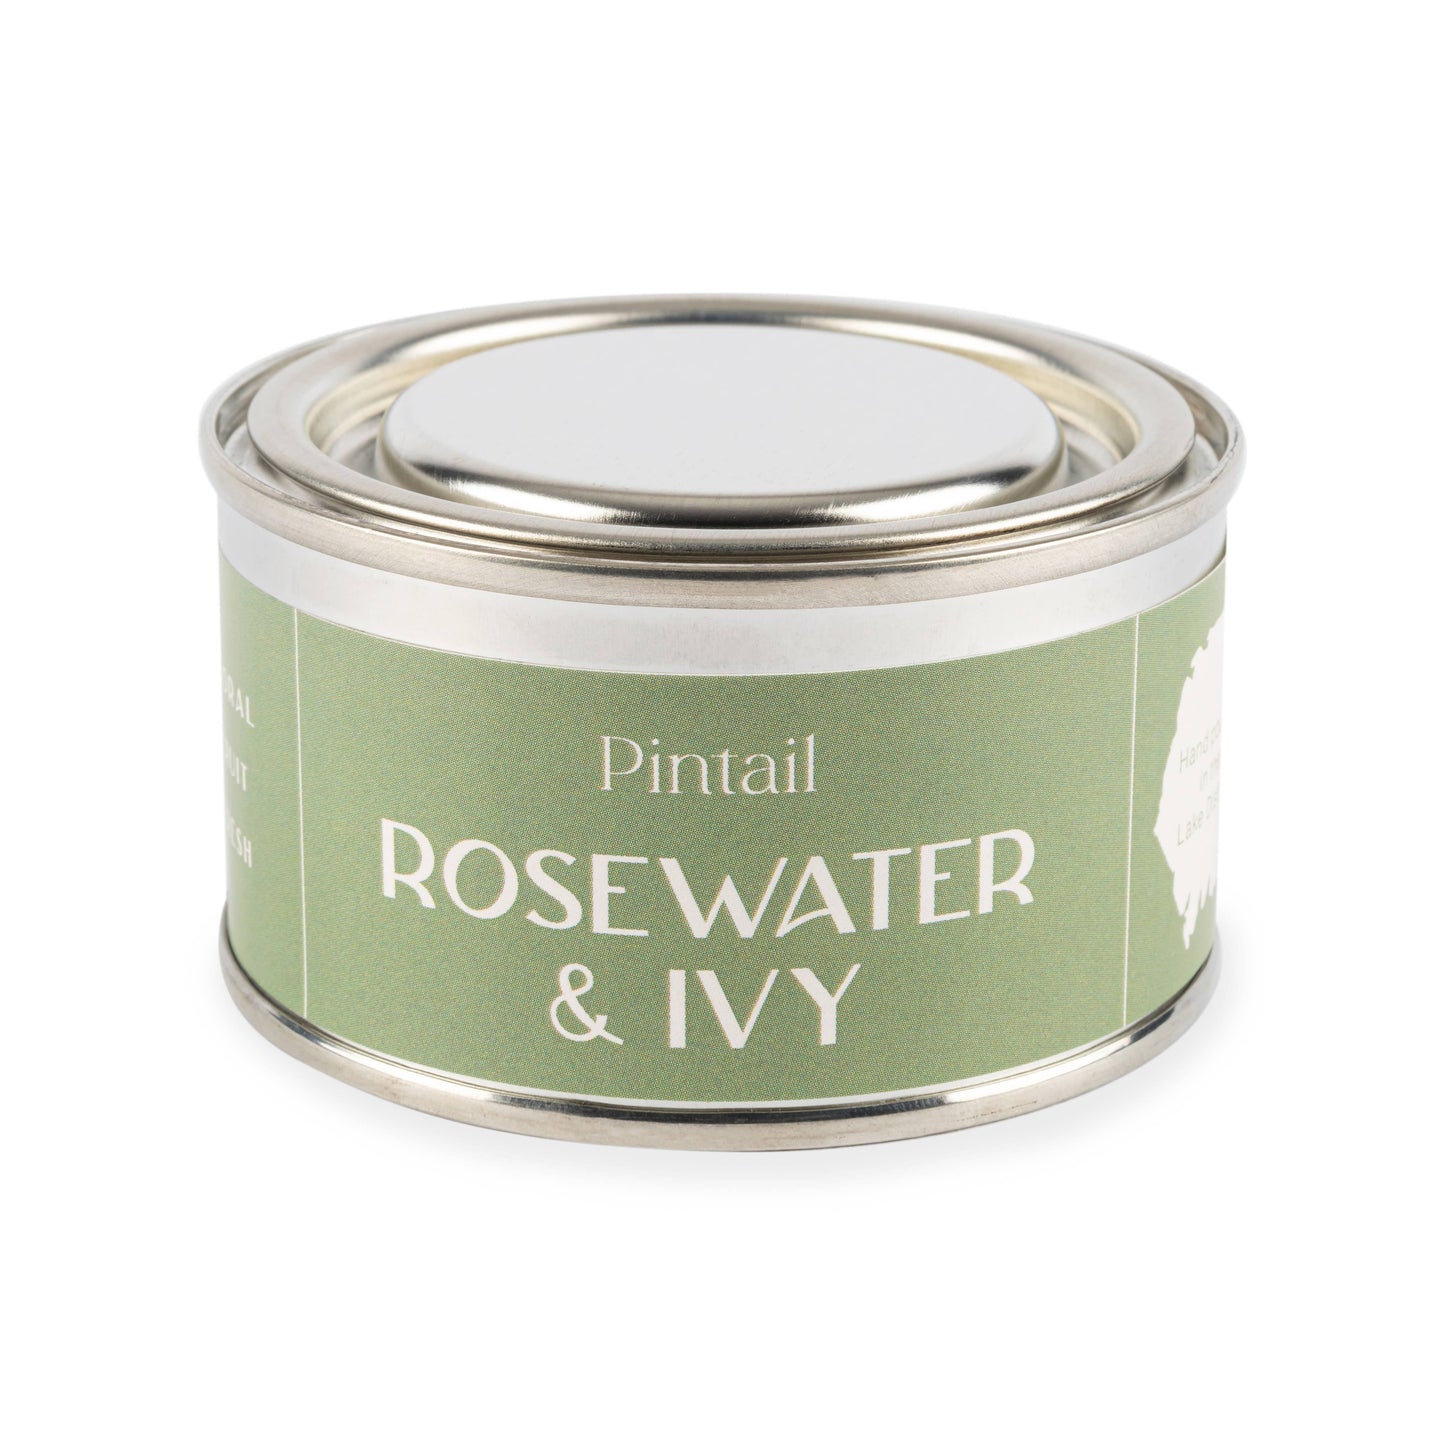 Rosewater and Ivy Paint Pintail Candle